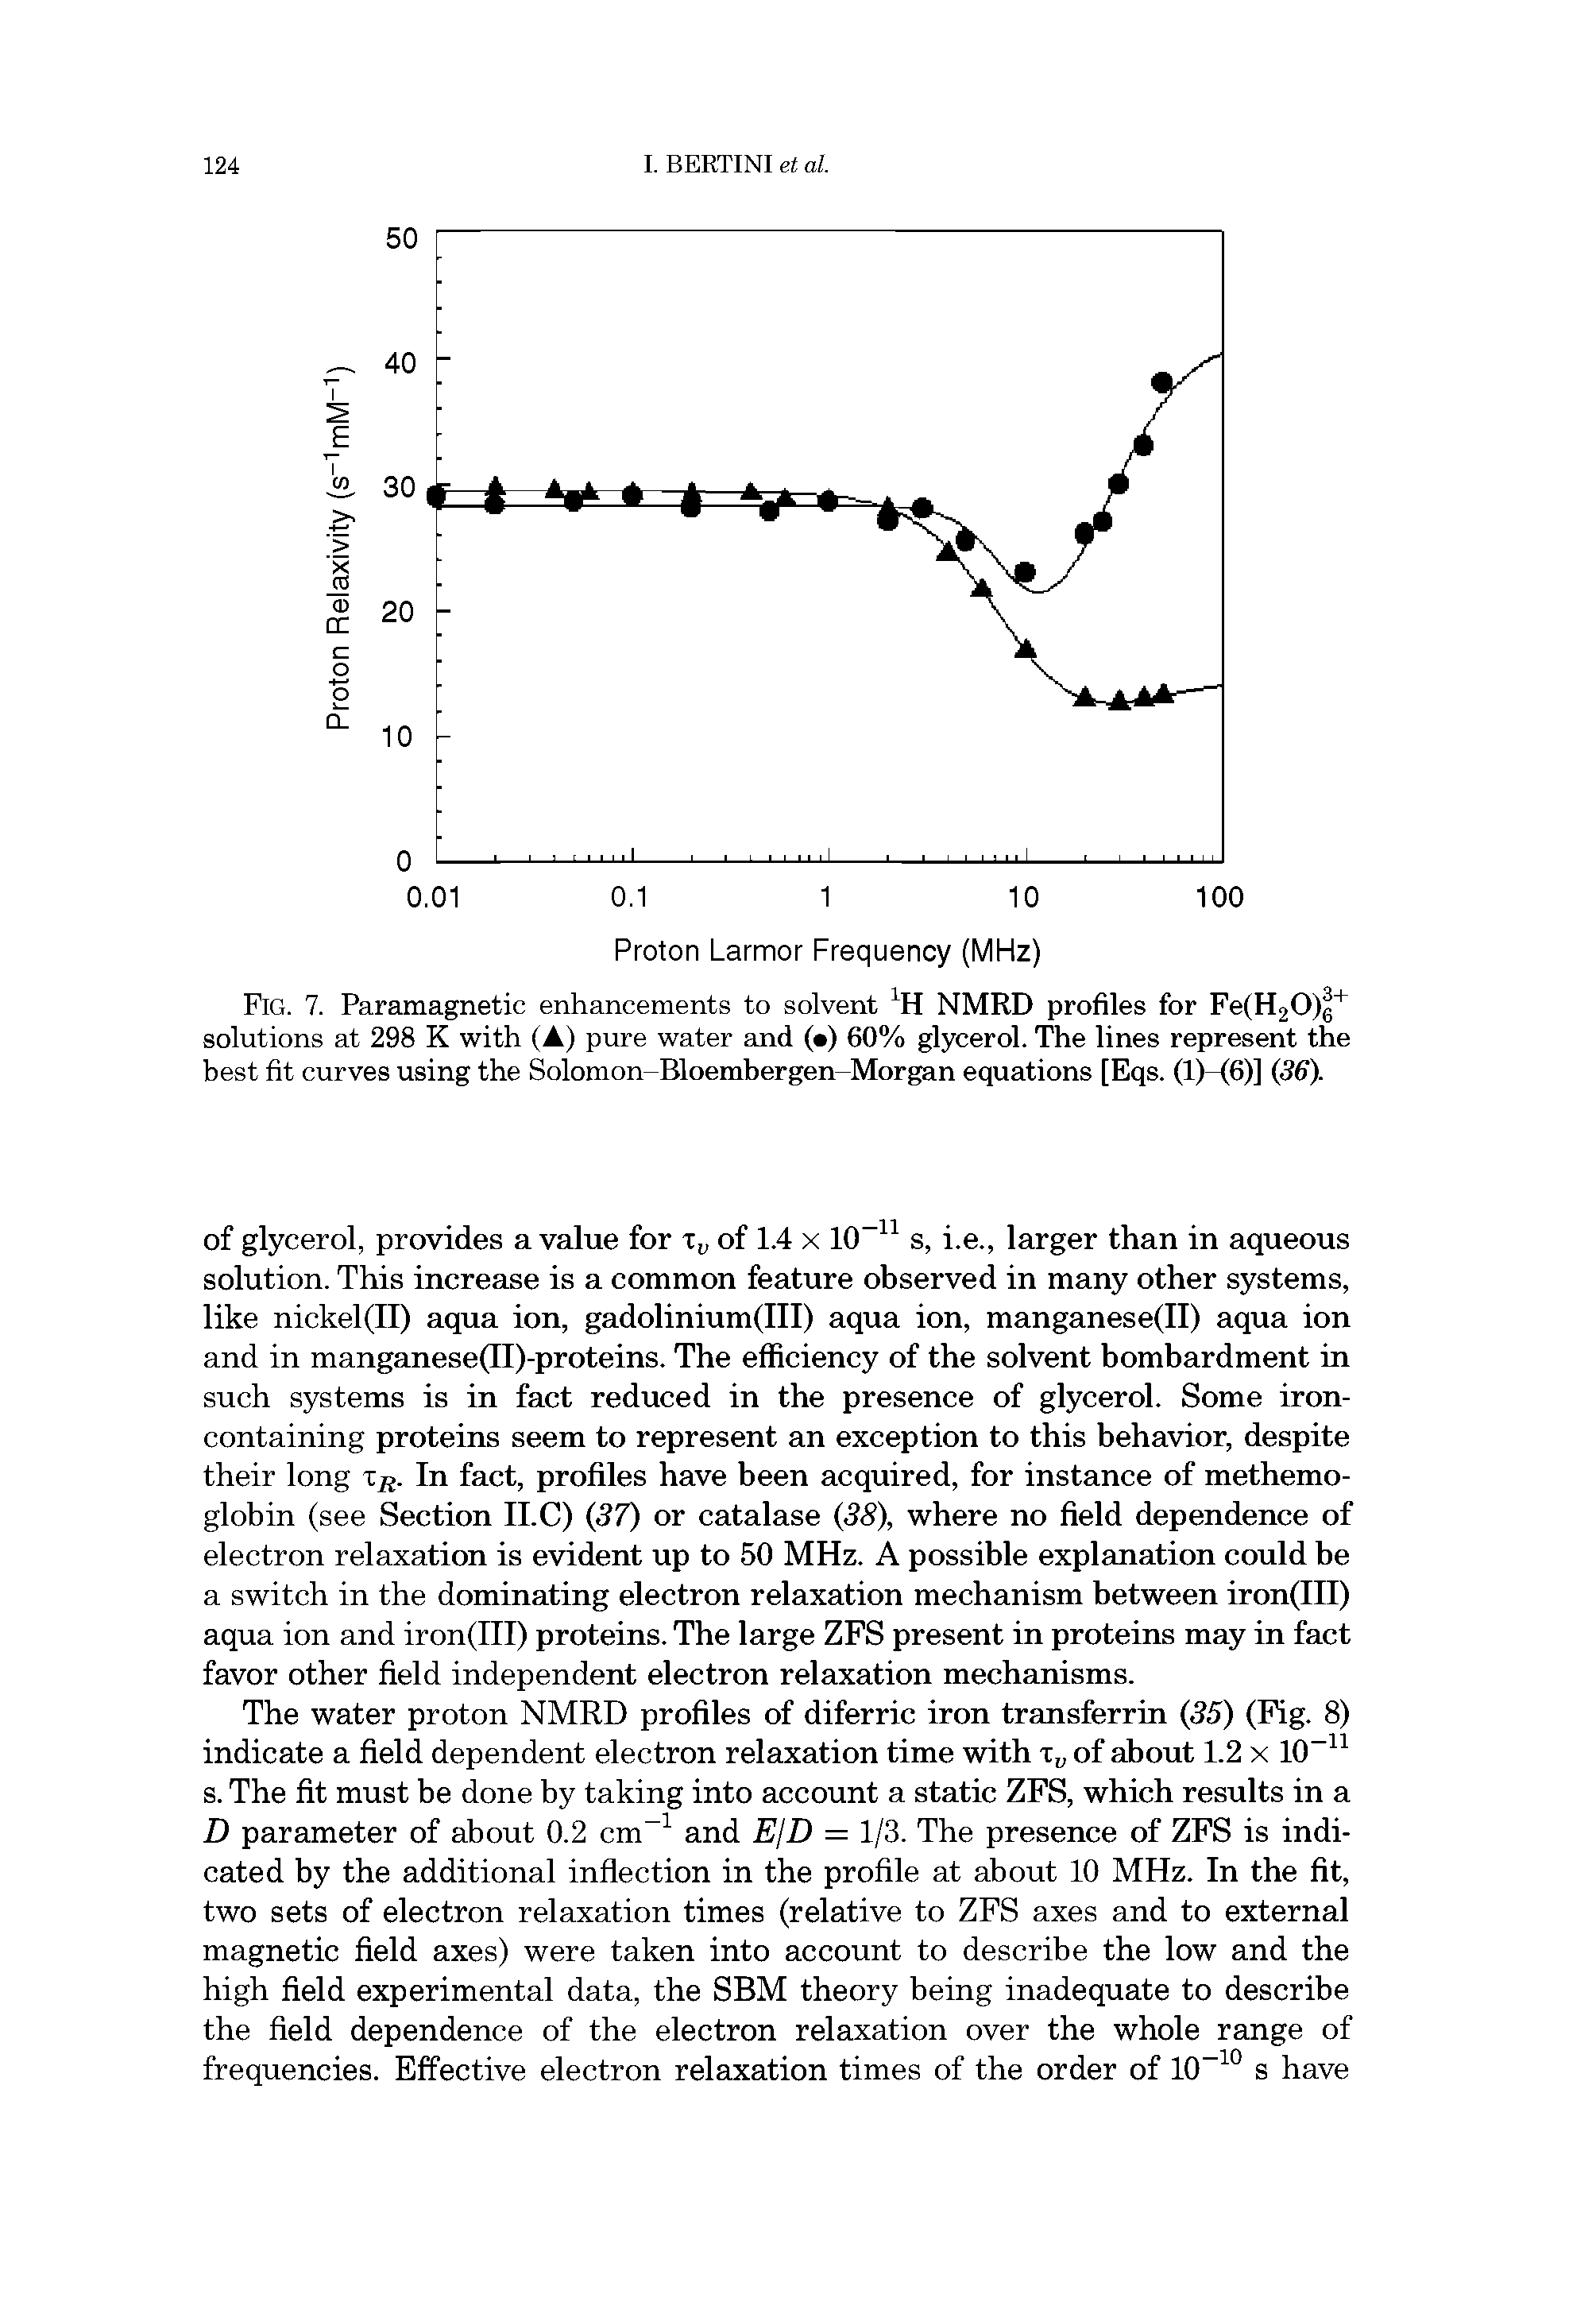 Fig. 7. Paramagnetic enhancements to solvent NMRD profiles for Fe(H20)g" " solutions at 298 K with (A) pure water and ( ) 60% glycerol. The lines represent the best fit curves using the Solomon-Bloembergen-Morgan equations [Eqs. (l)-(6)] 36).